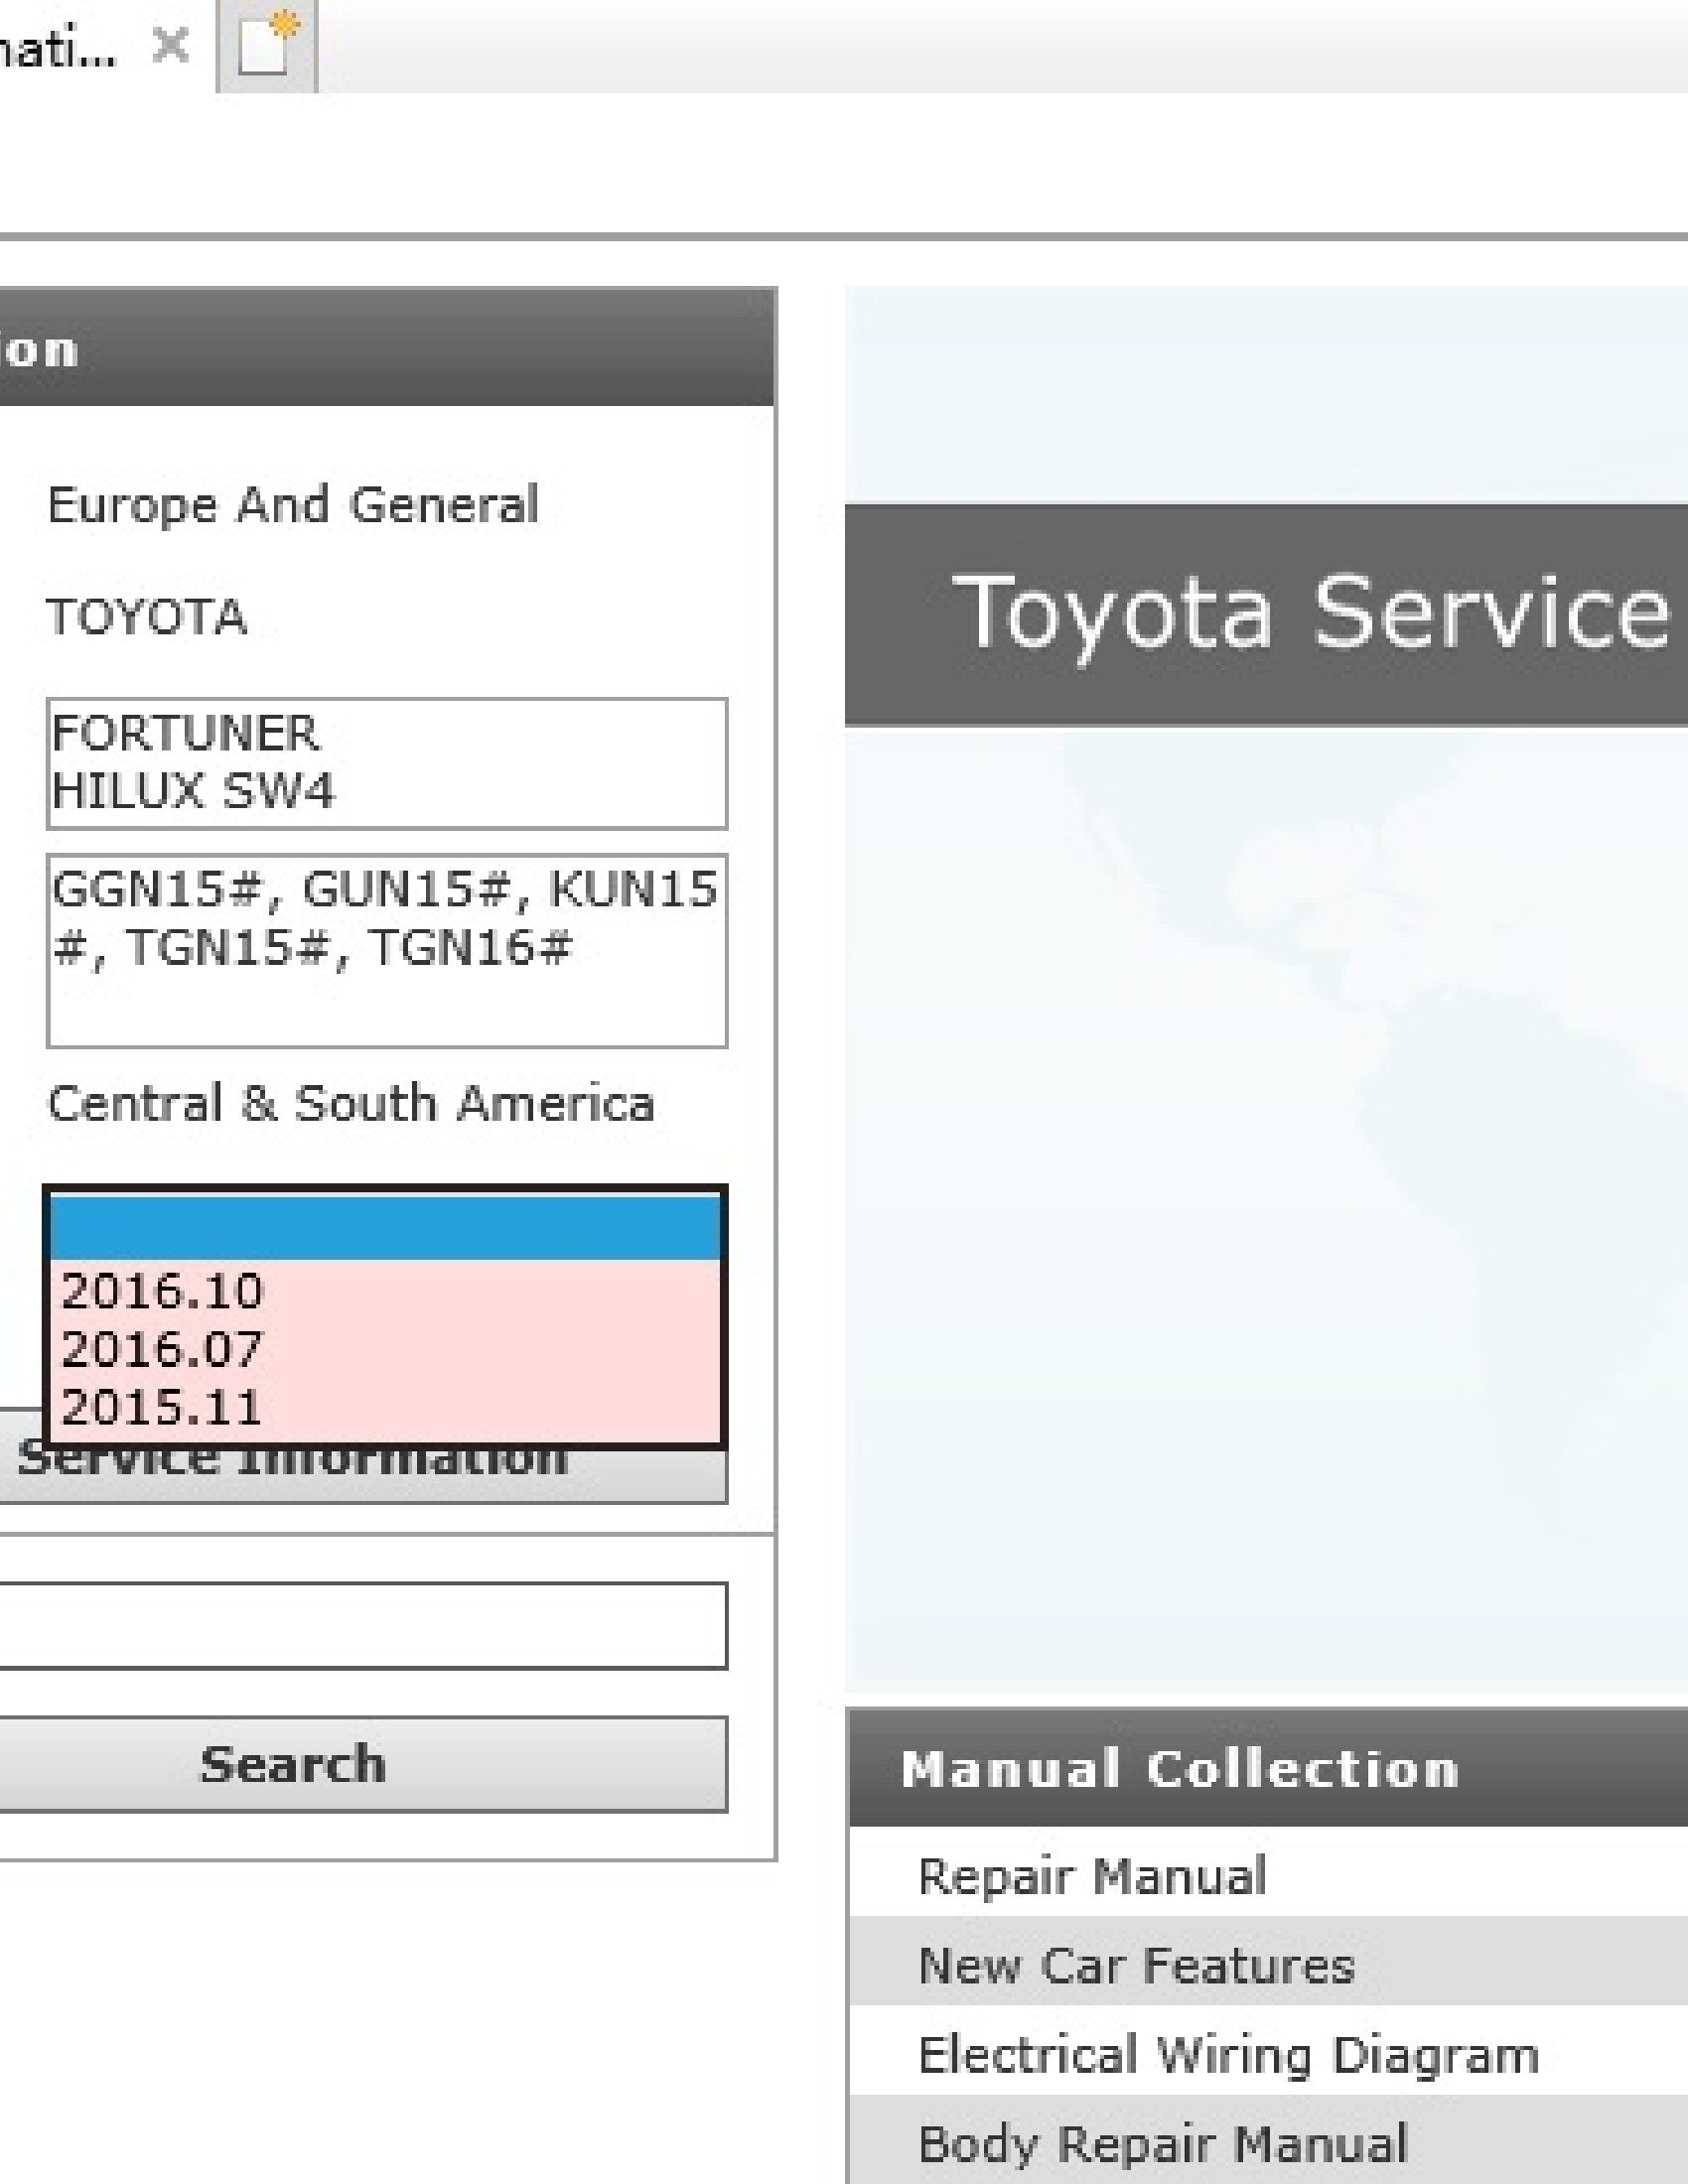 Toyota SW4 FORTUNER HILUX manual